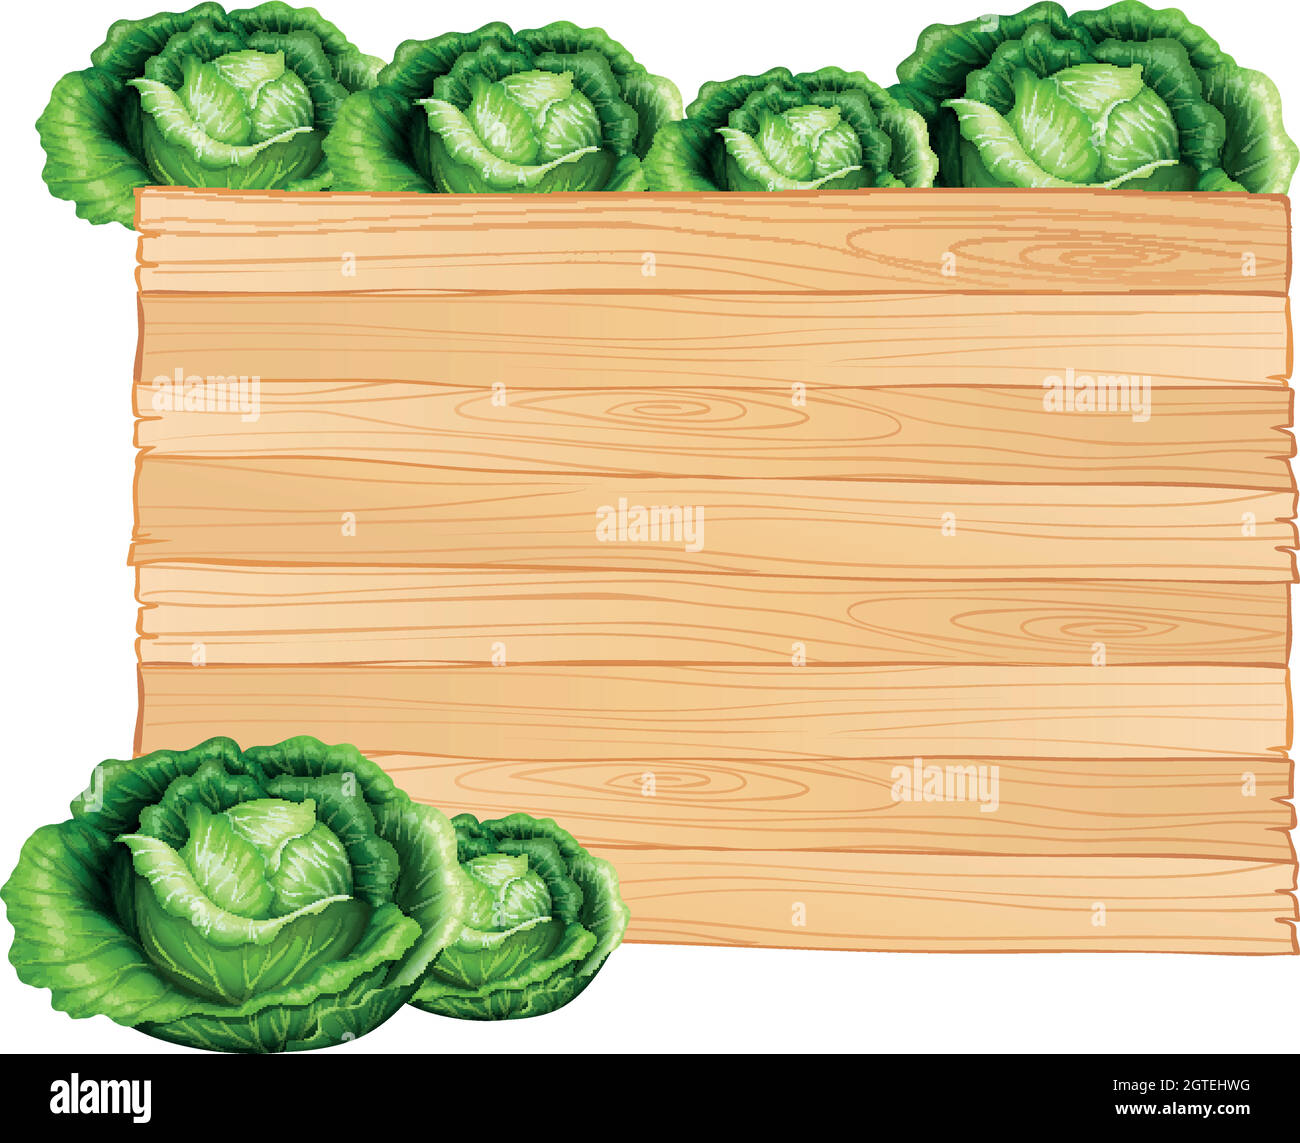 Wooden board and cabbages Stock Vector